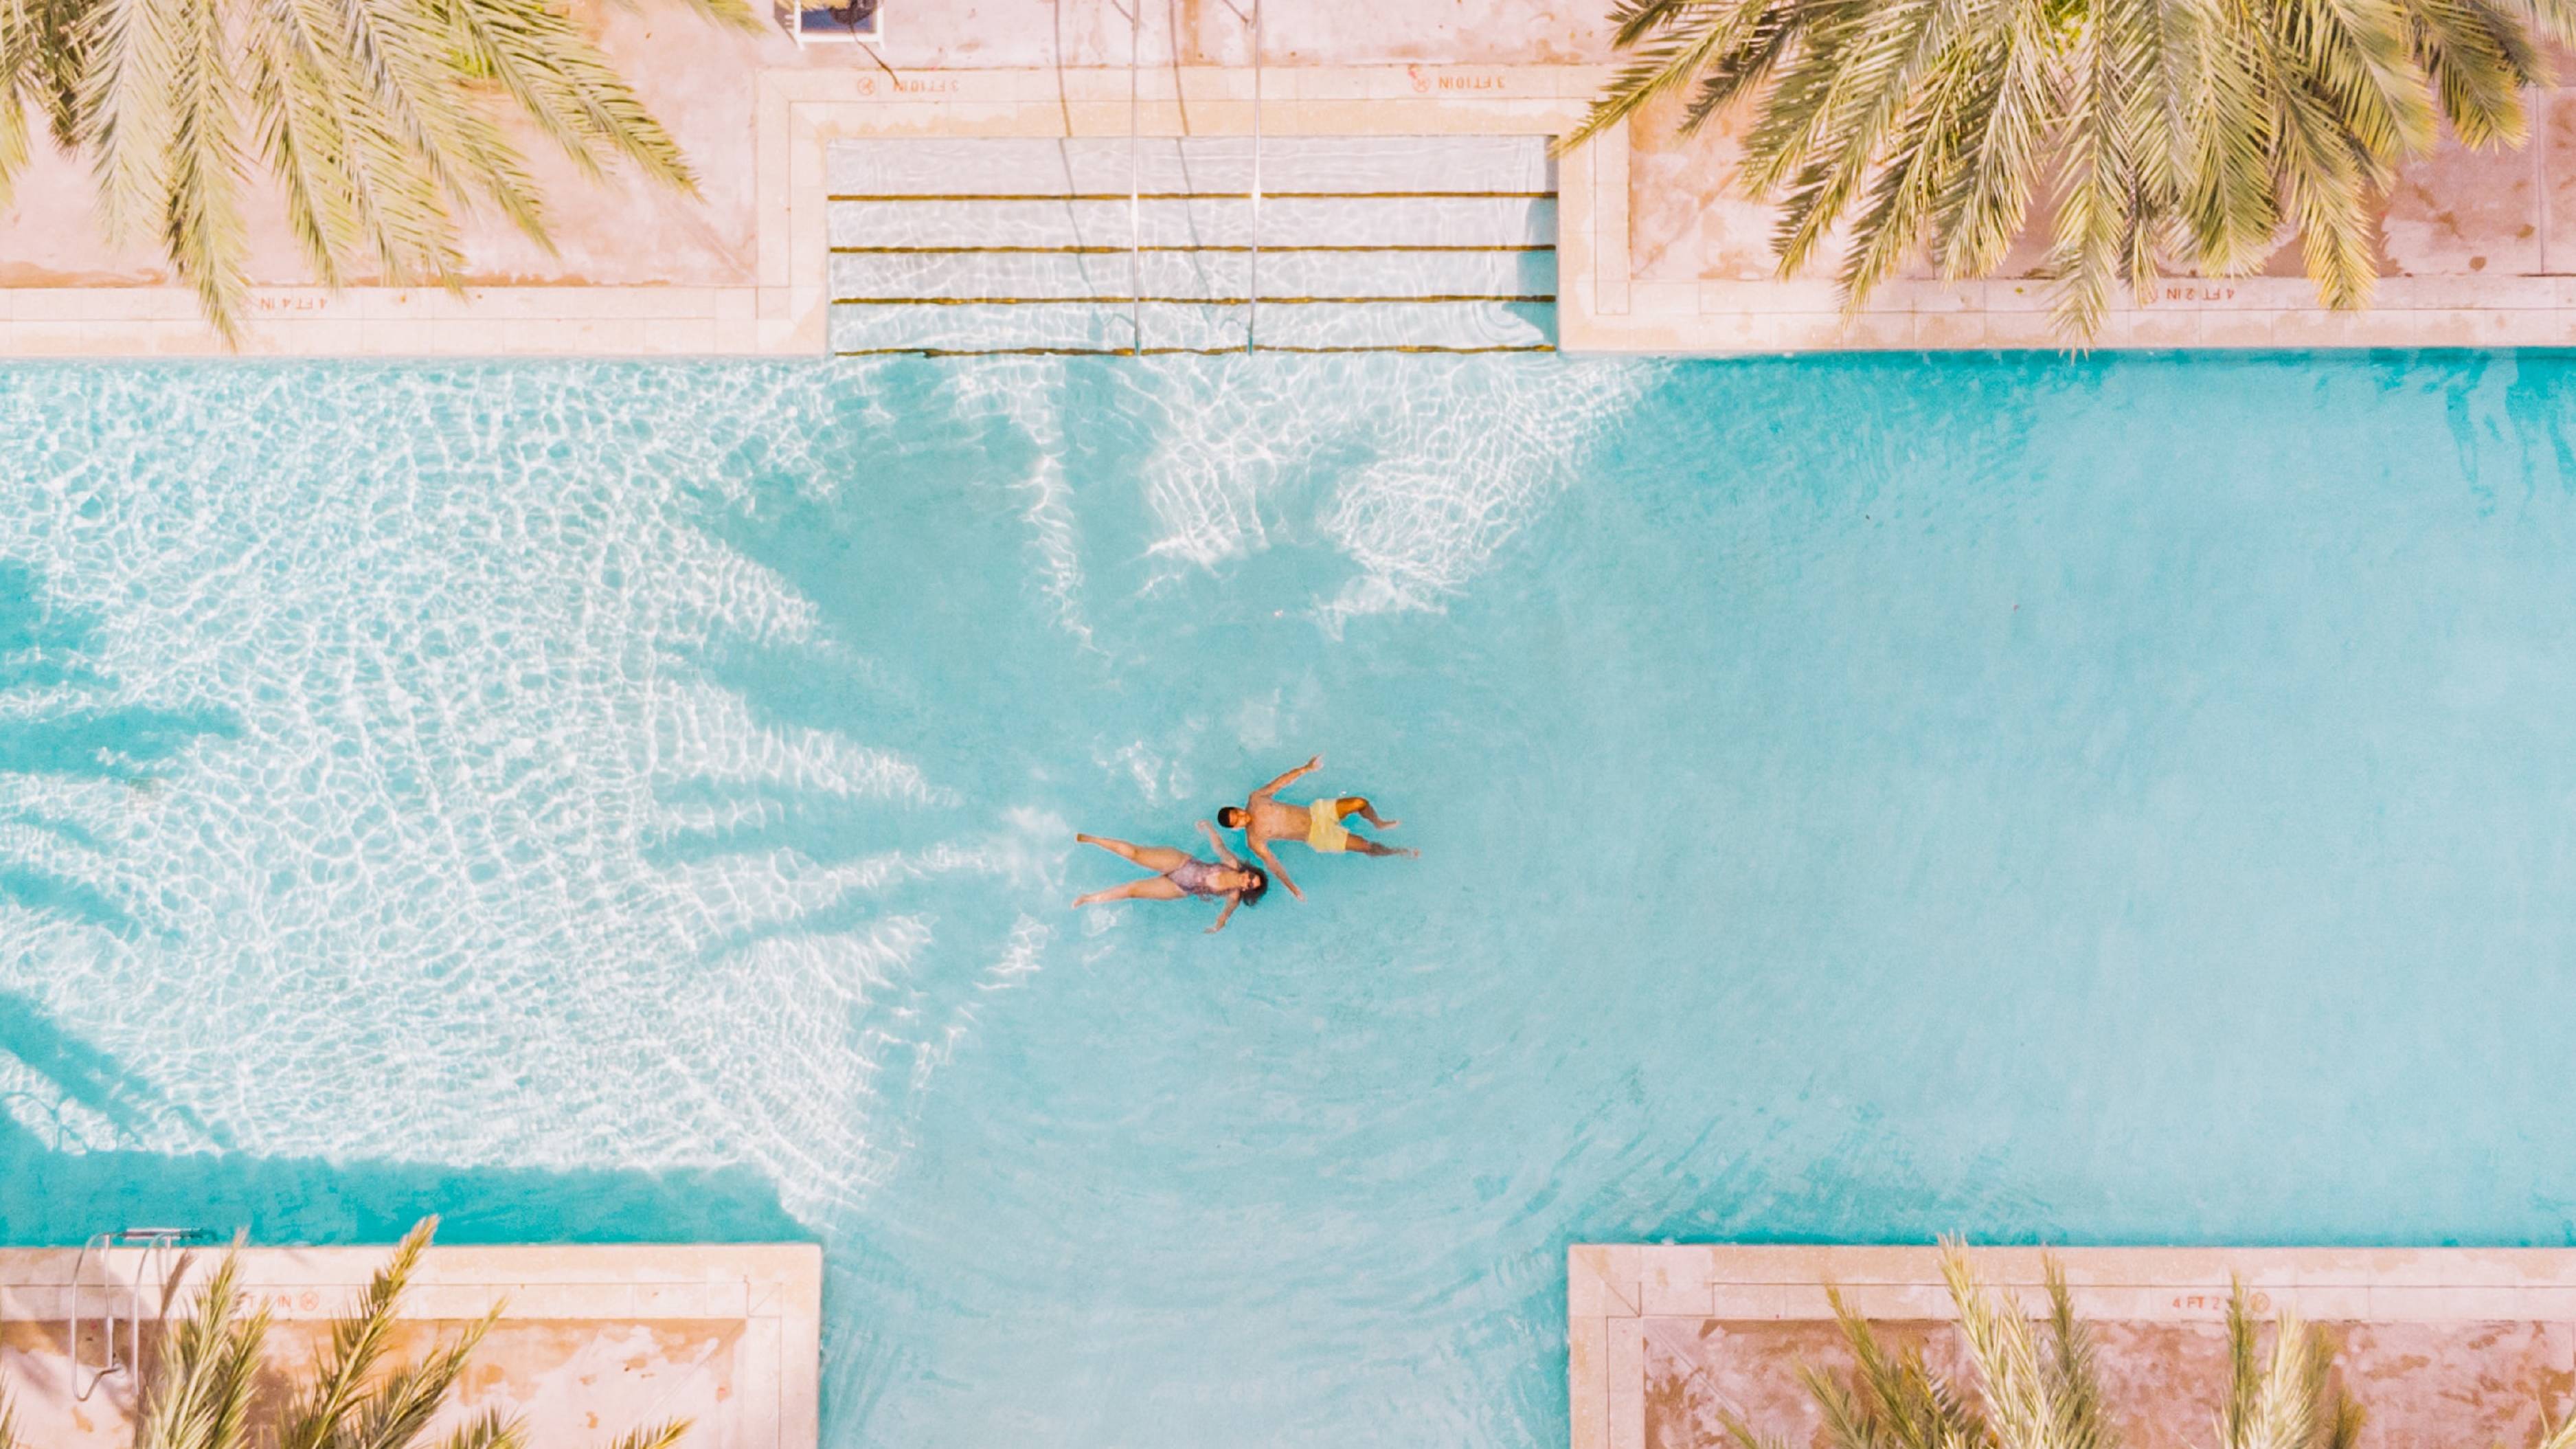 aerial view of pool with people